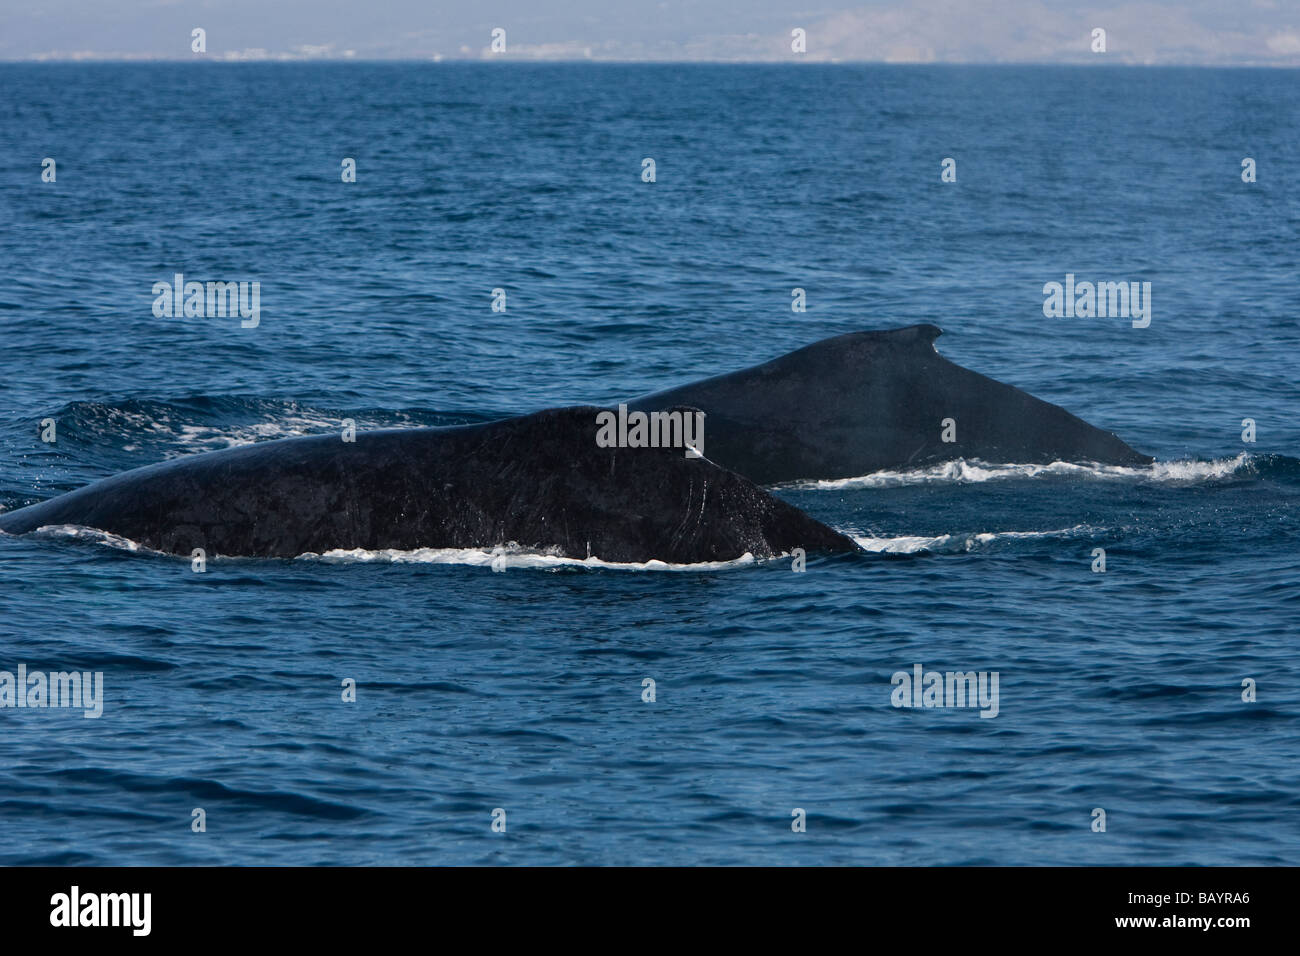 Humpback whales Megaptera novaeanglia Buckelwale pair swimming on surface Stock Photo